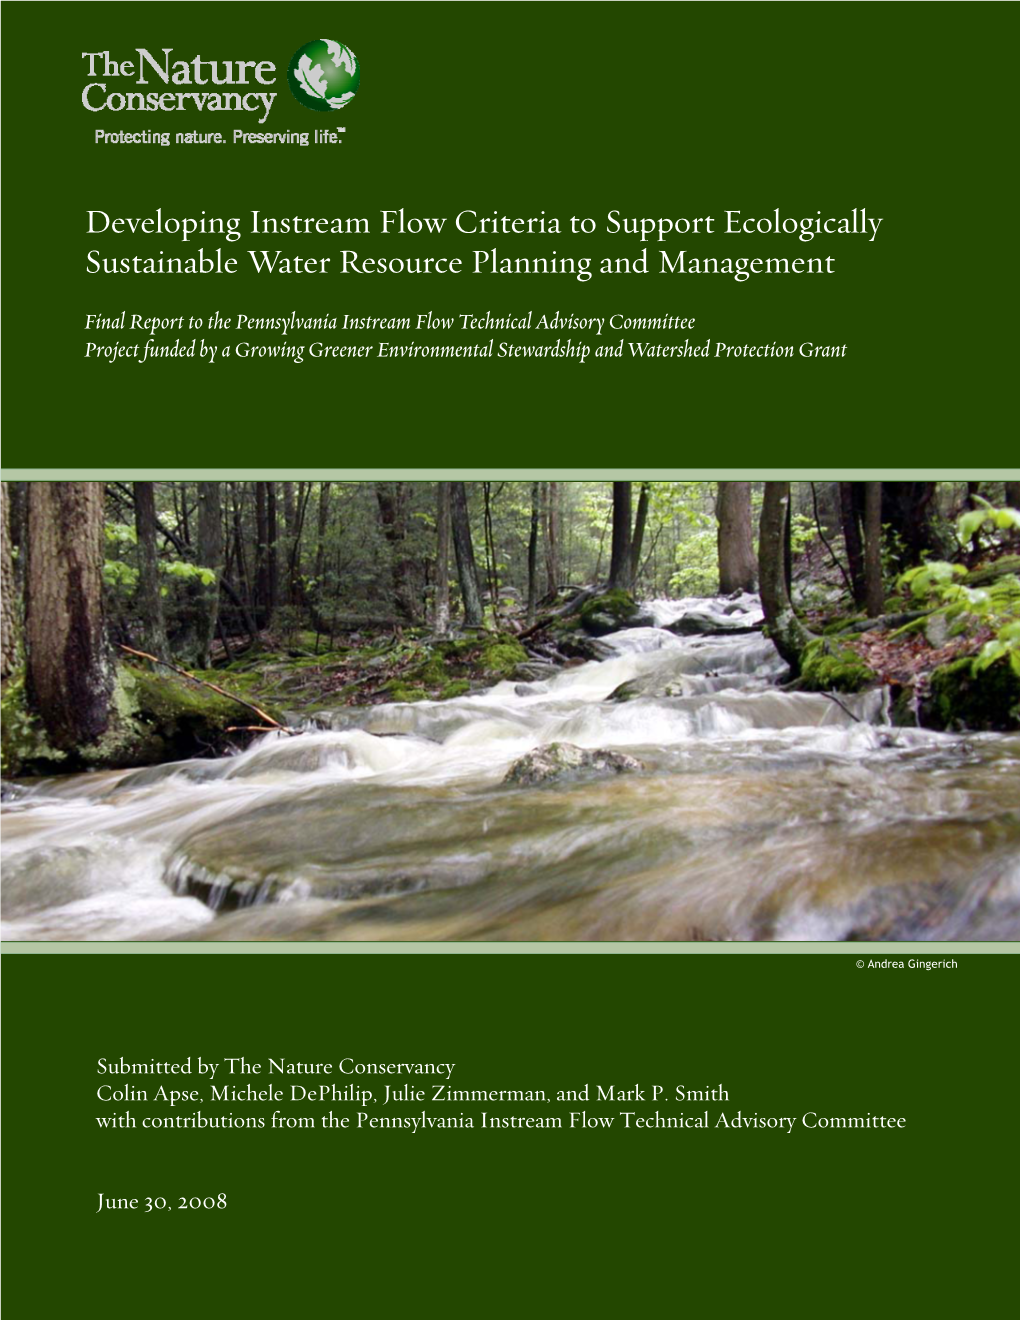 Developing Instream Flow Criteria to Support Ecologically Sustainable Water Resource Planning and Management